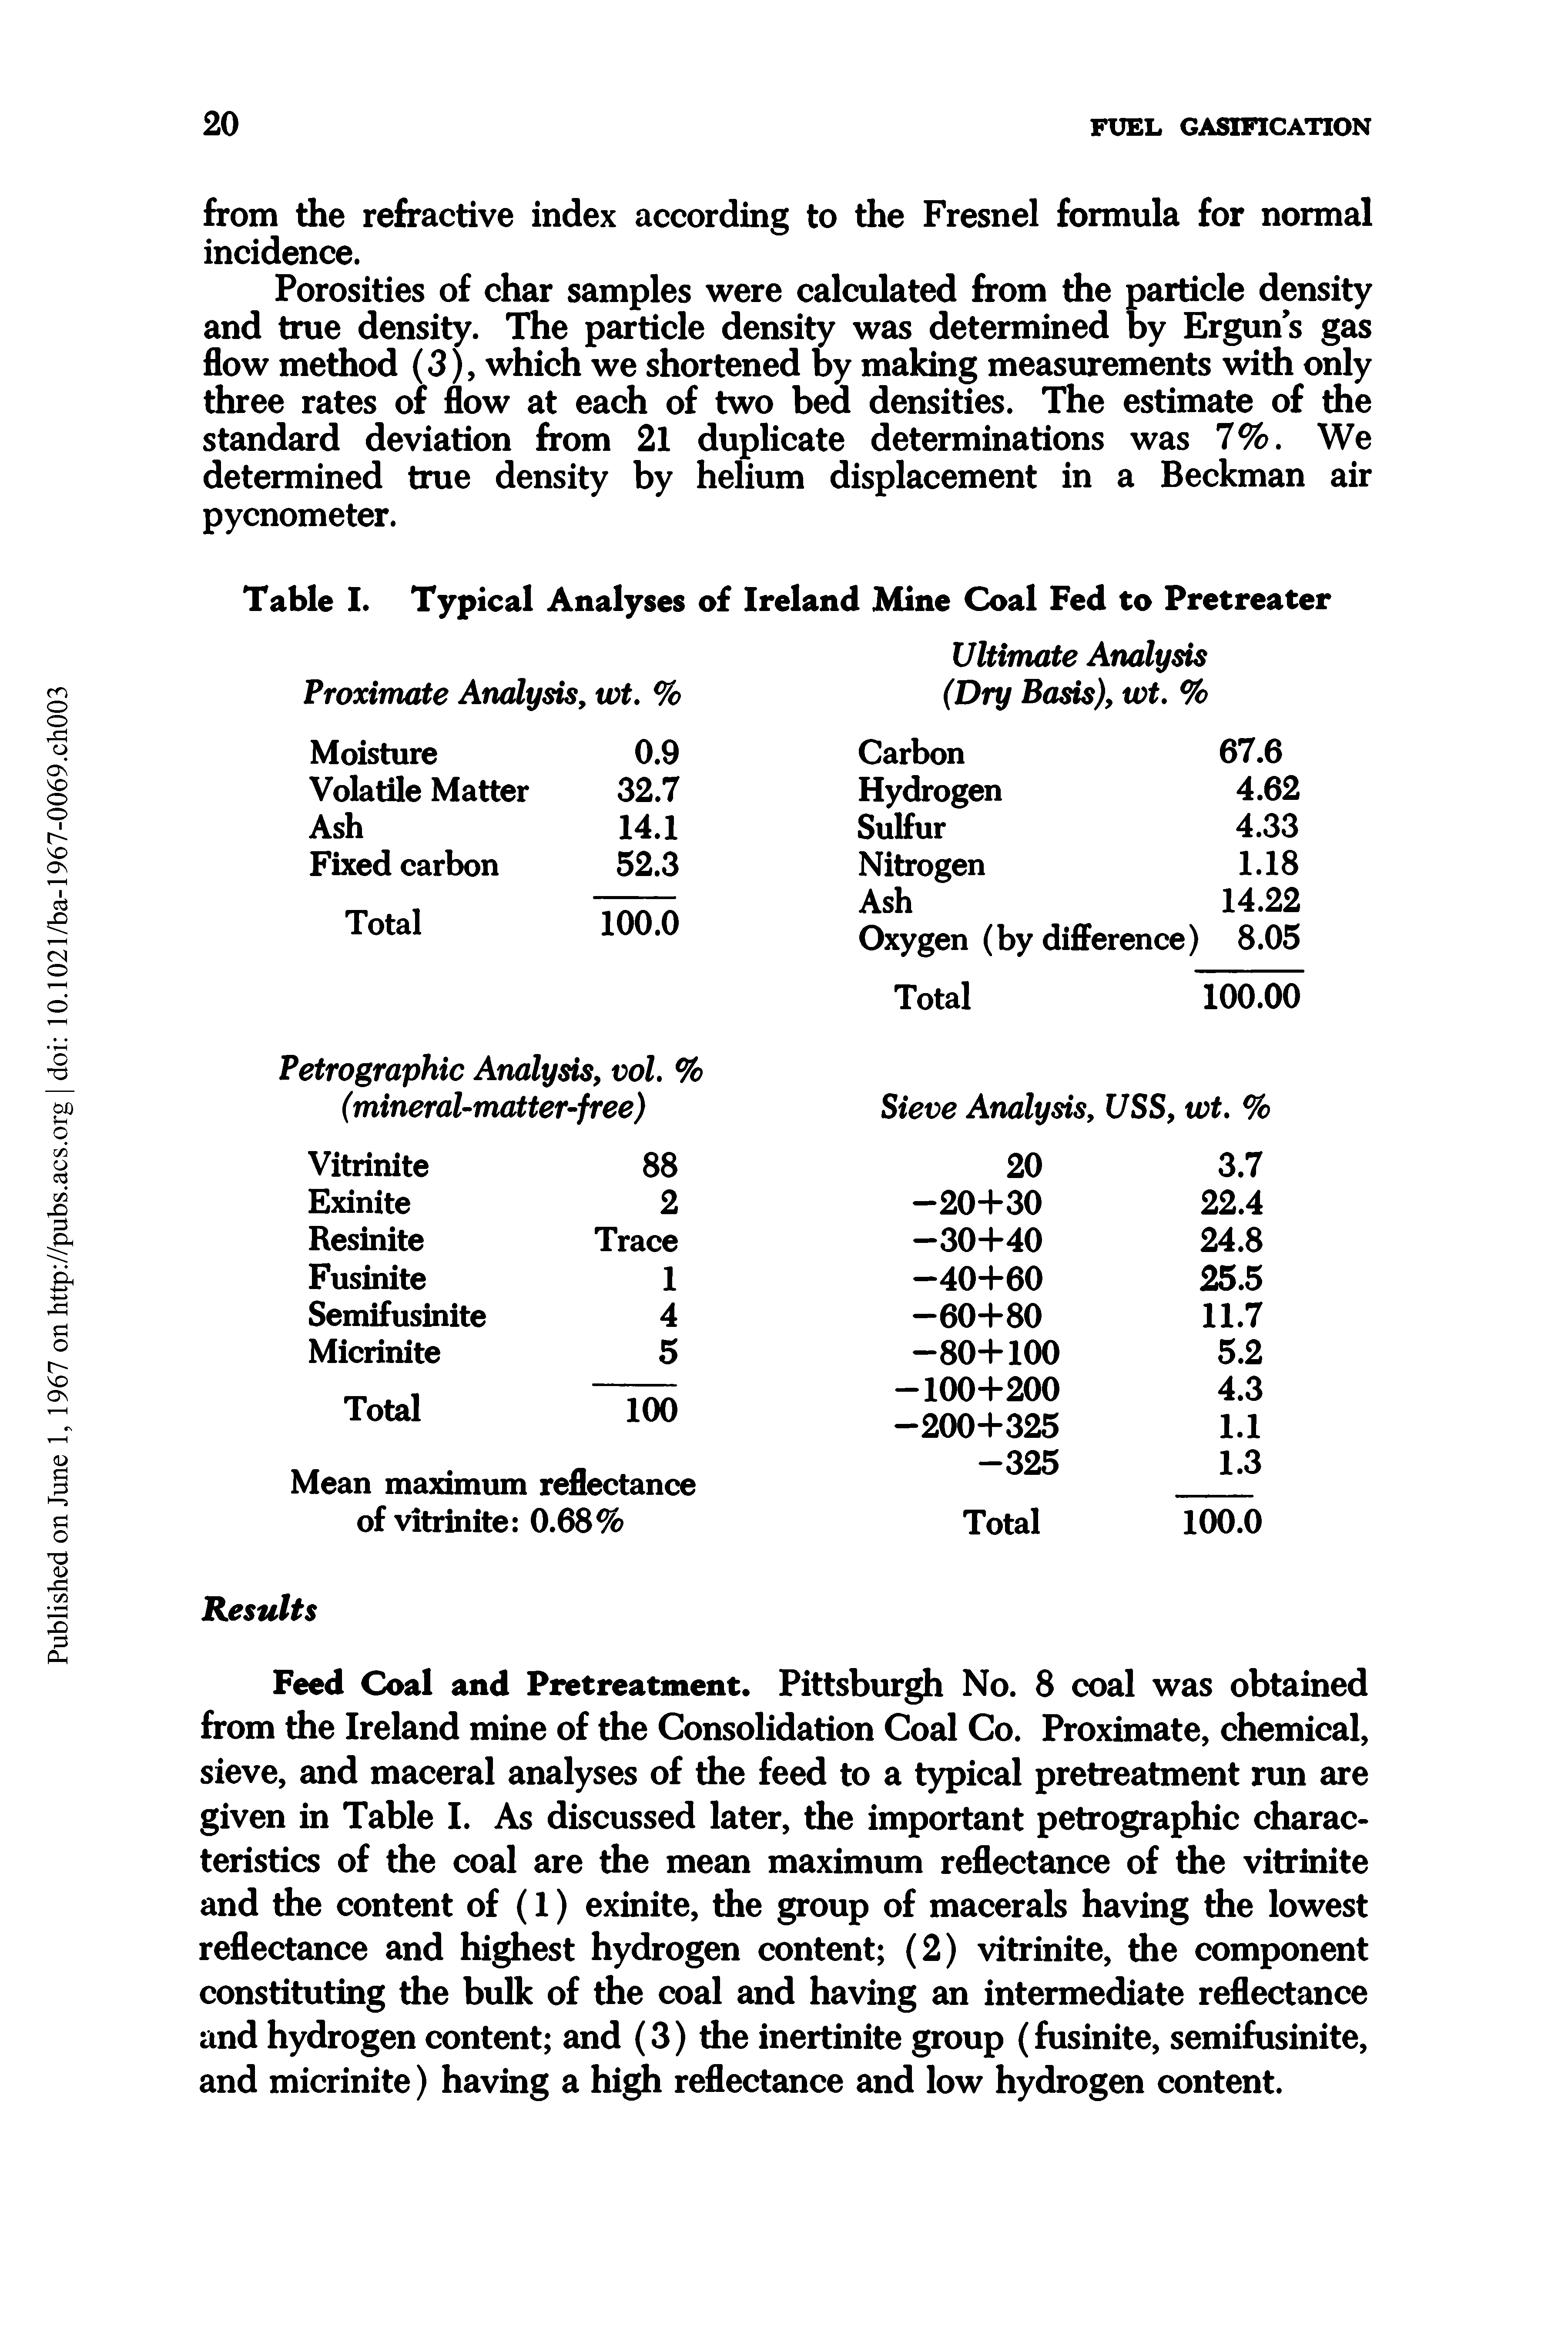 Table I. Typical Analyses of Ireland Mine Coal Fed to Pretreater...